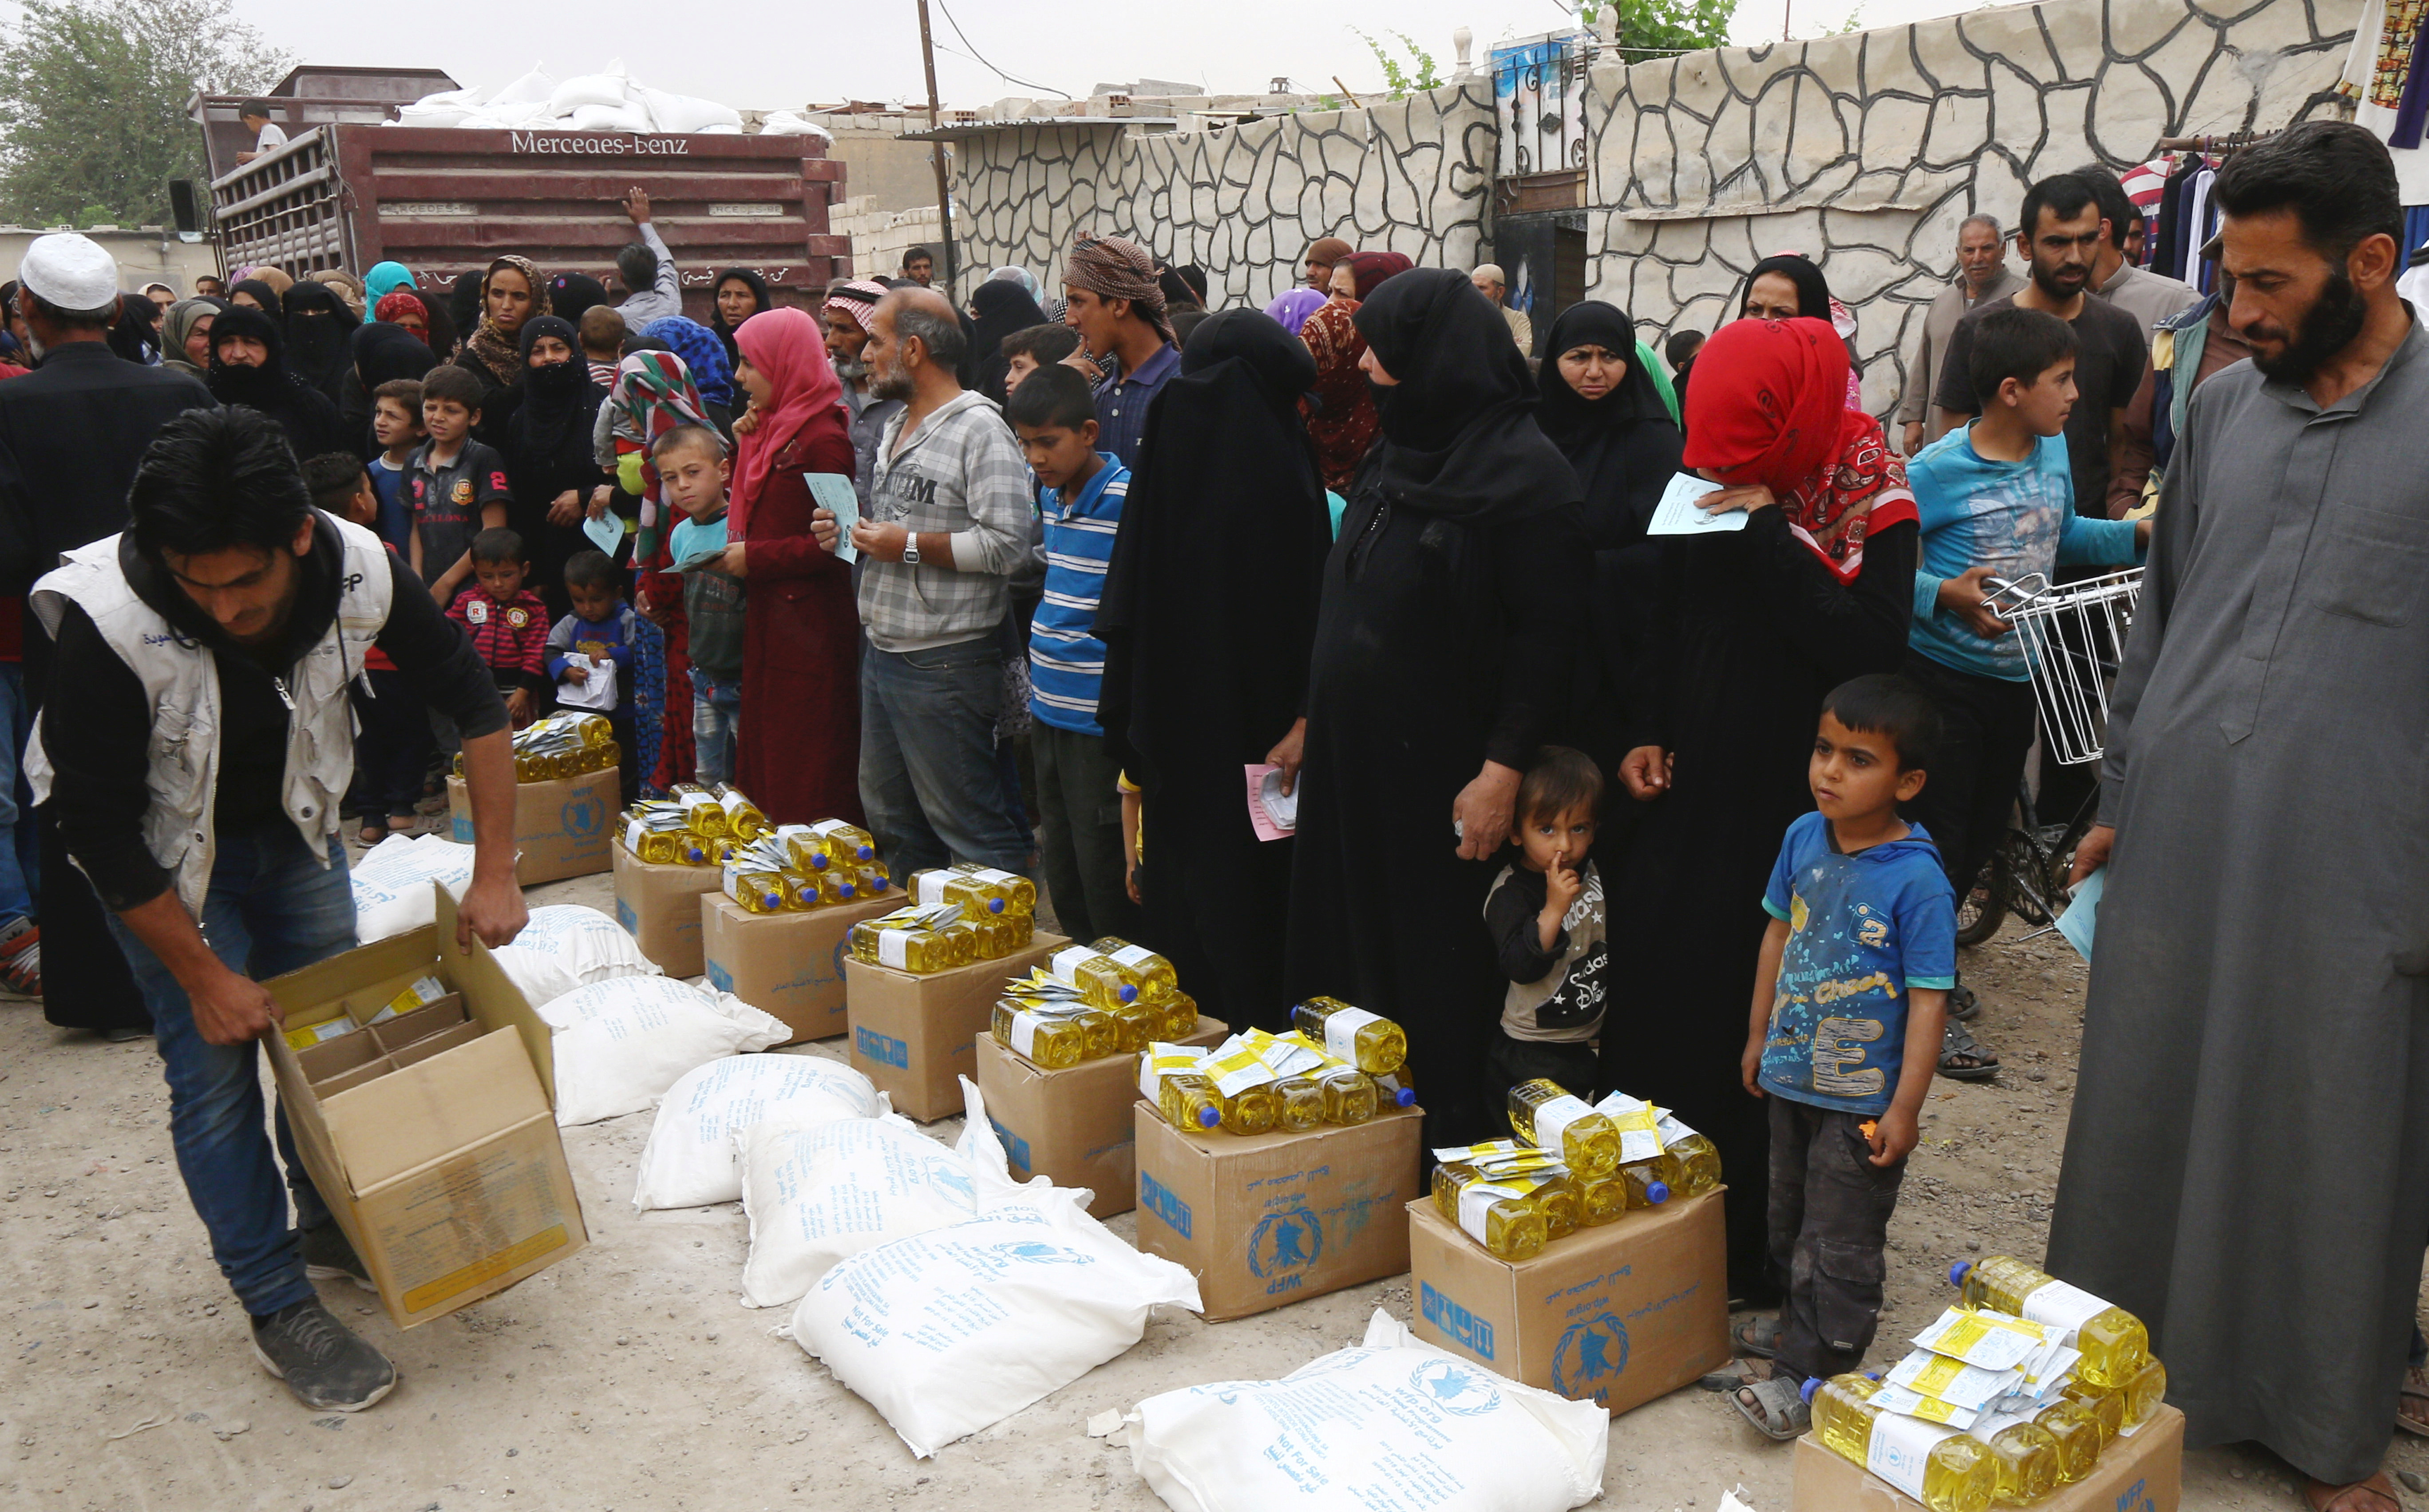 People stand in a queue near the food aid given by UN's World Food Programme in Raqqa